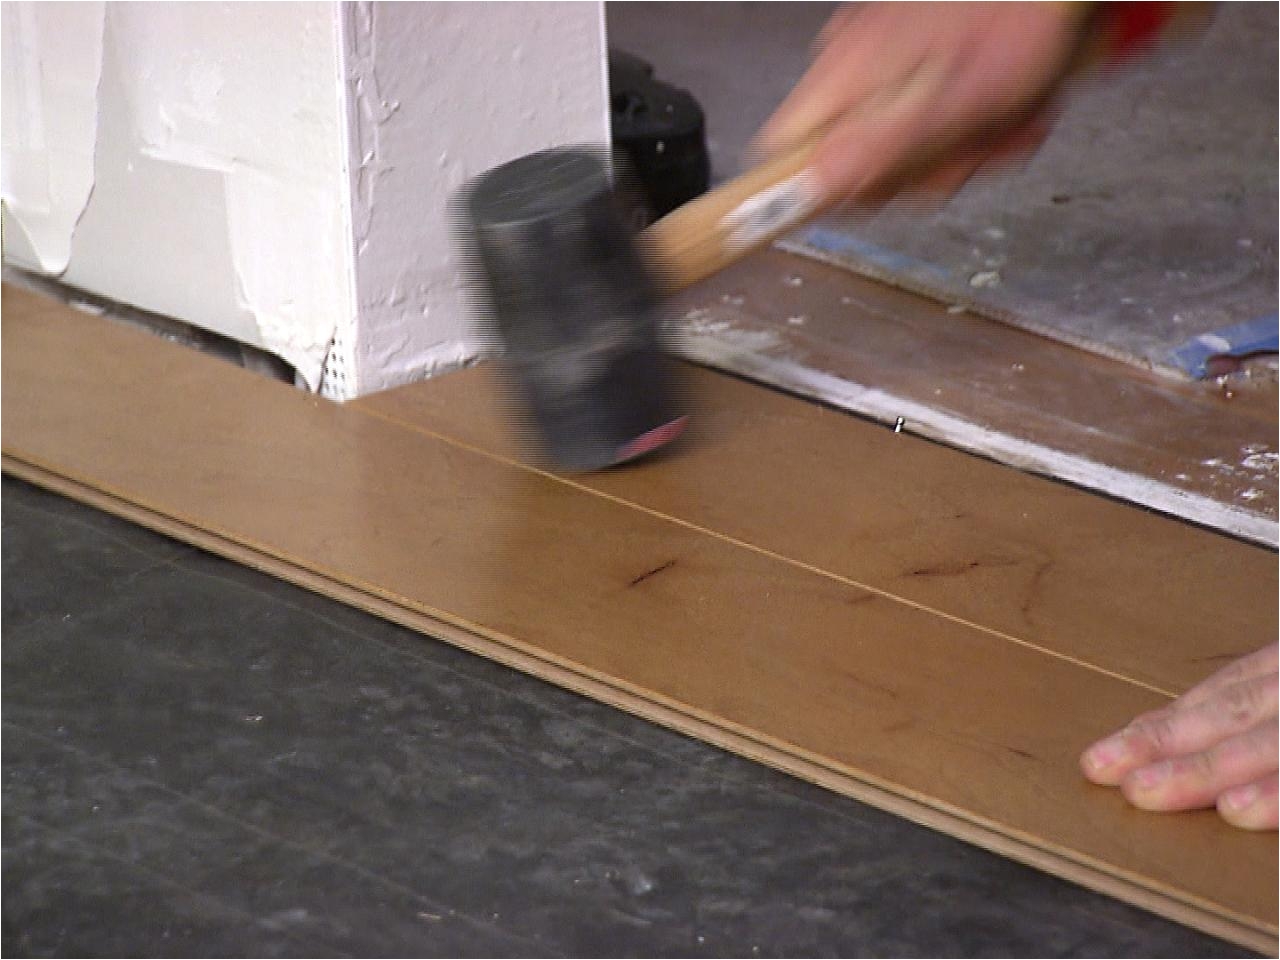 Removing Laminate Glue From Hardwood Floors How to Install An Engineered Hardwood Floor How tos Diy